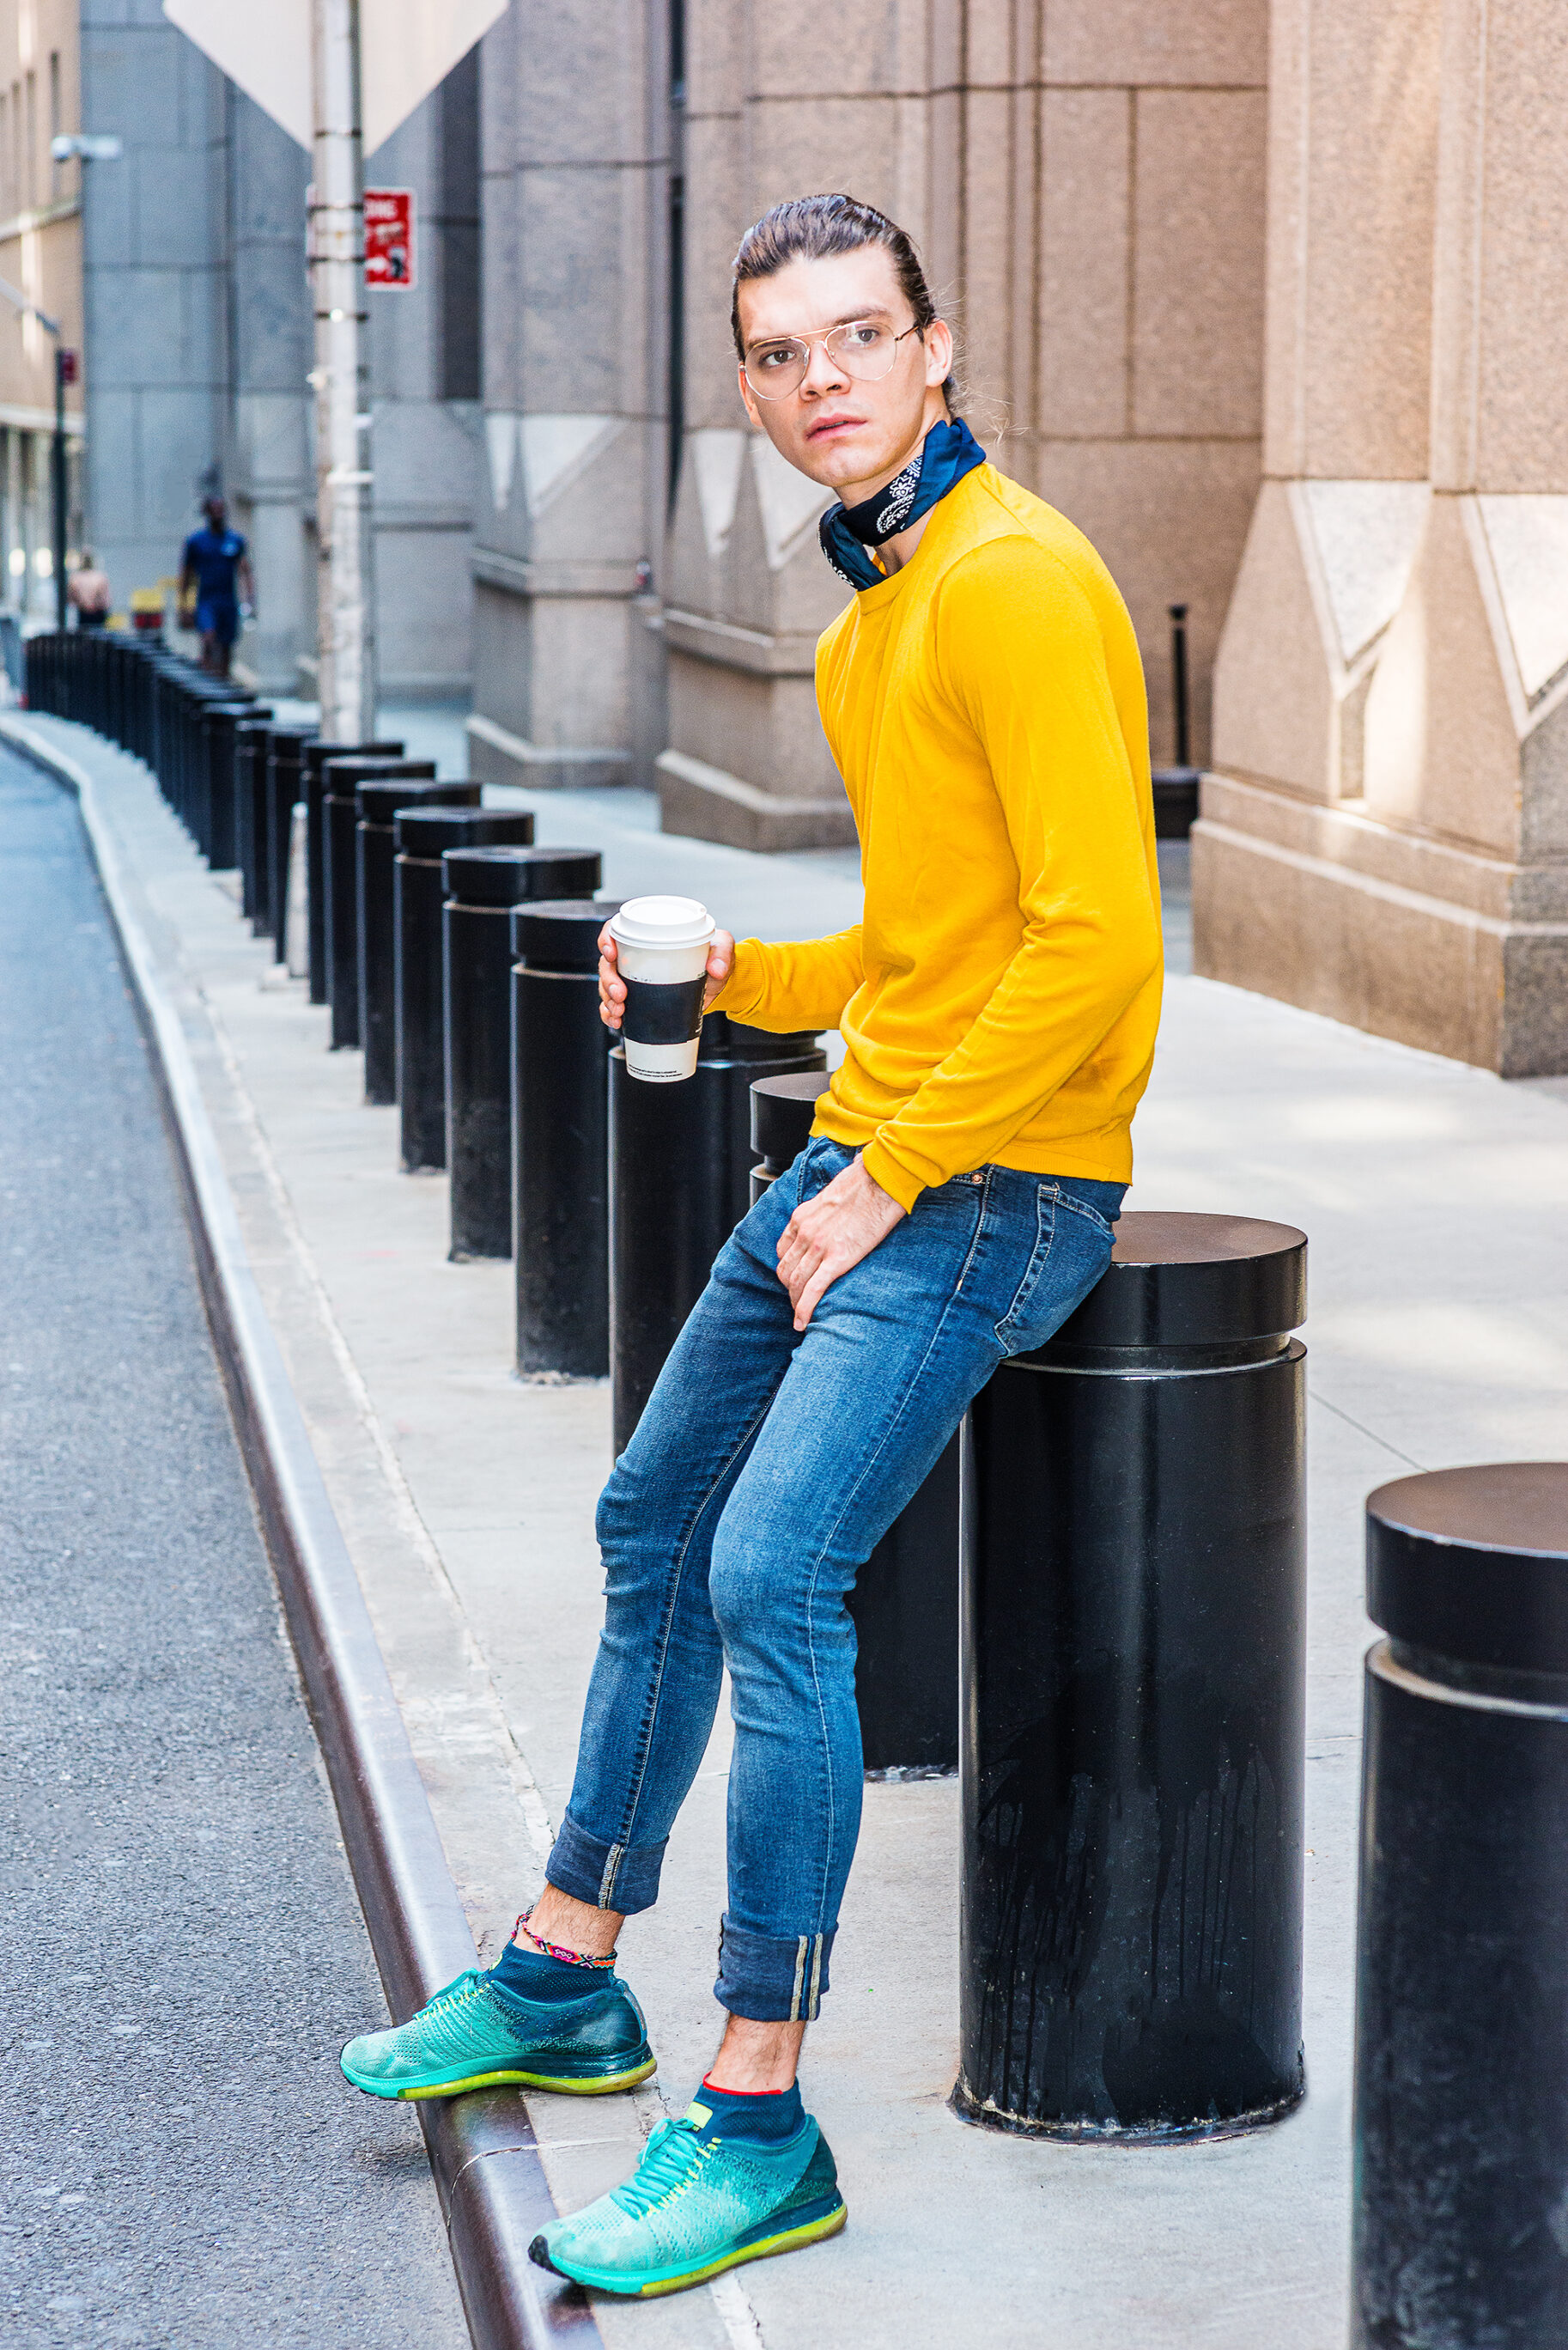 Sweater Over Shirts, Relaxed Jeans, And Boots Or Flats